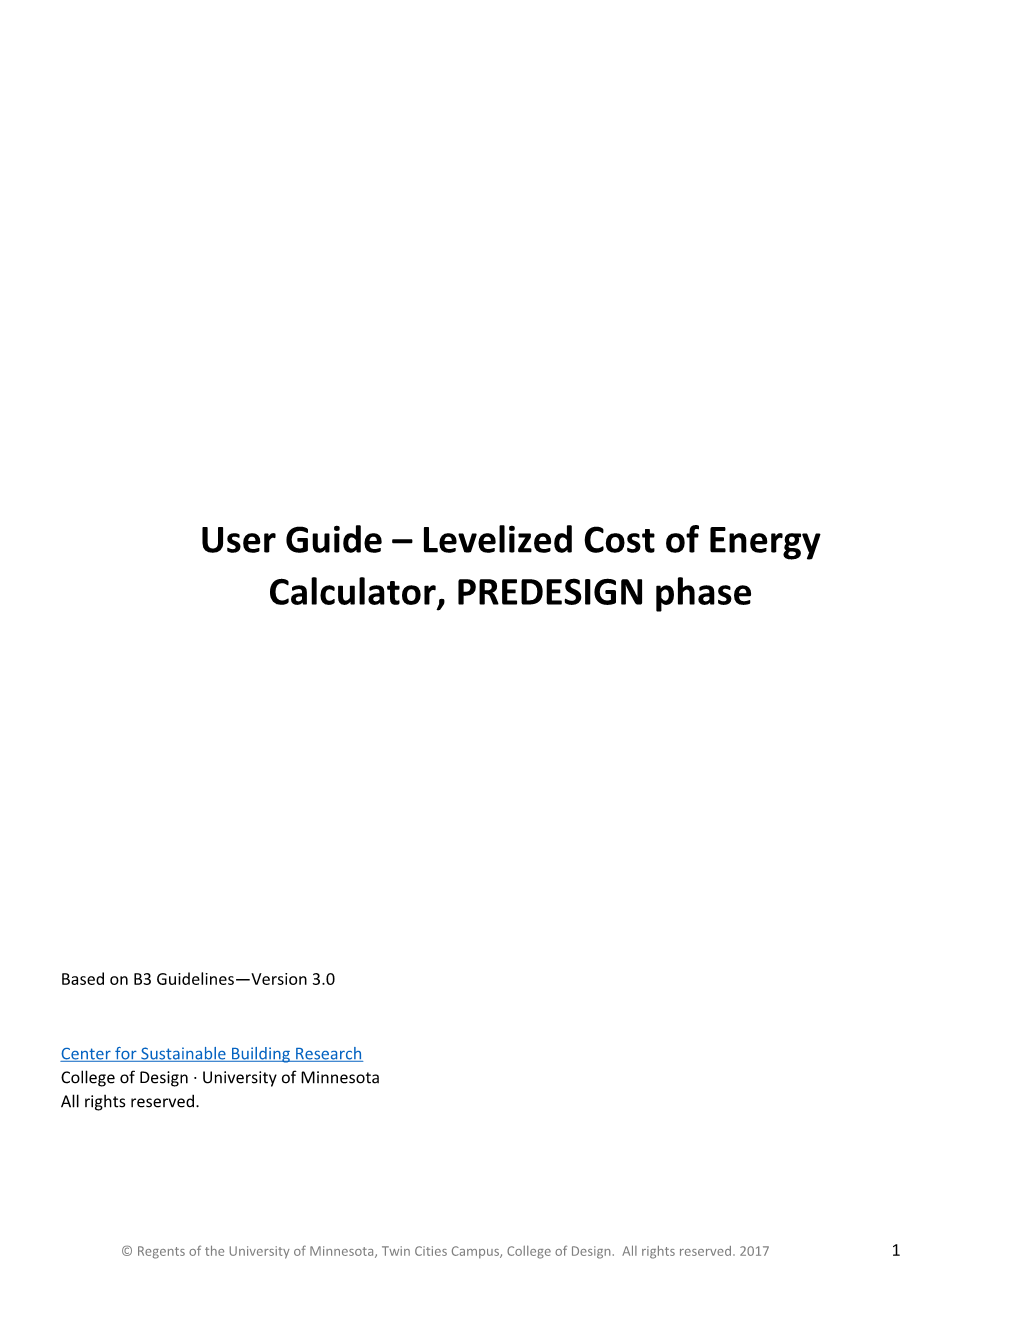 User Guide Levelized Cost of Energy Calculator, PREDESIGN Phase